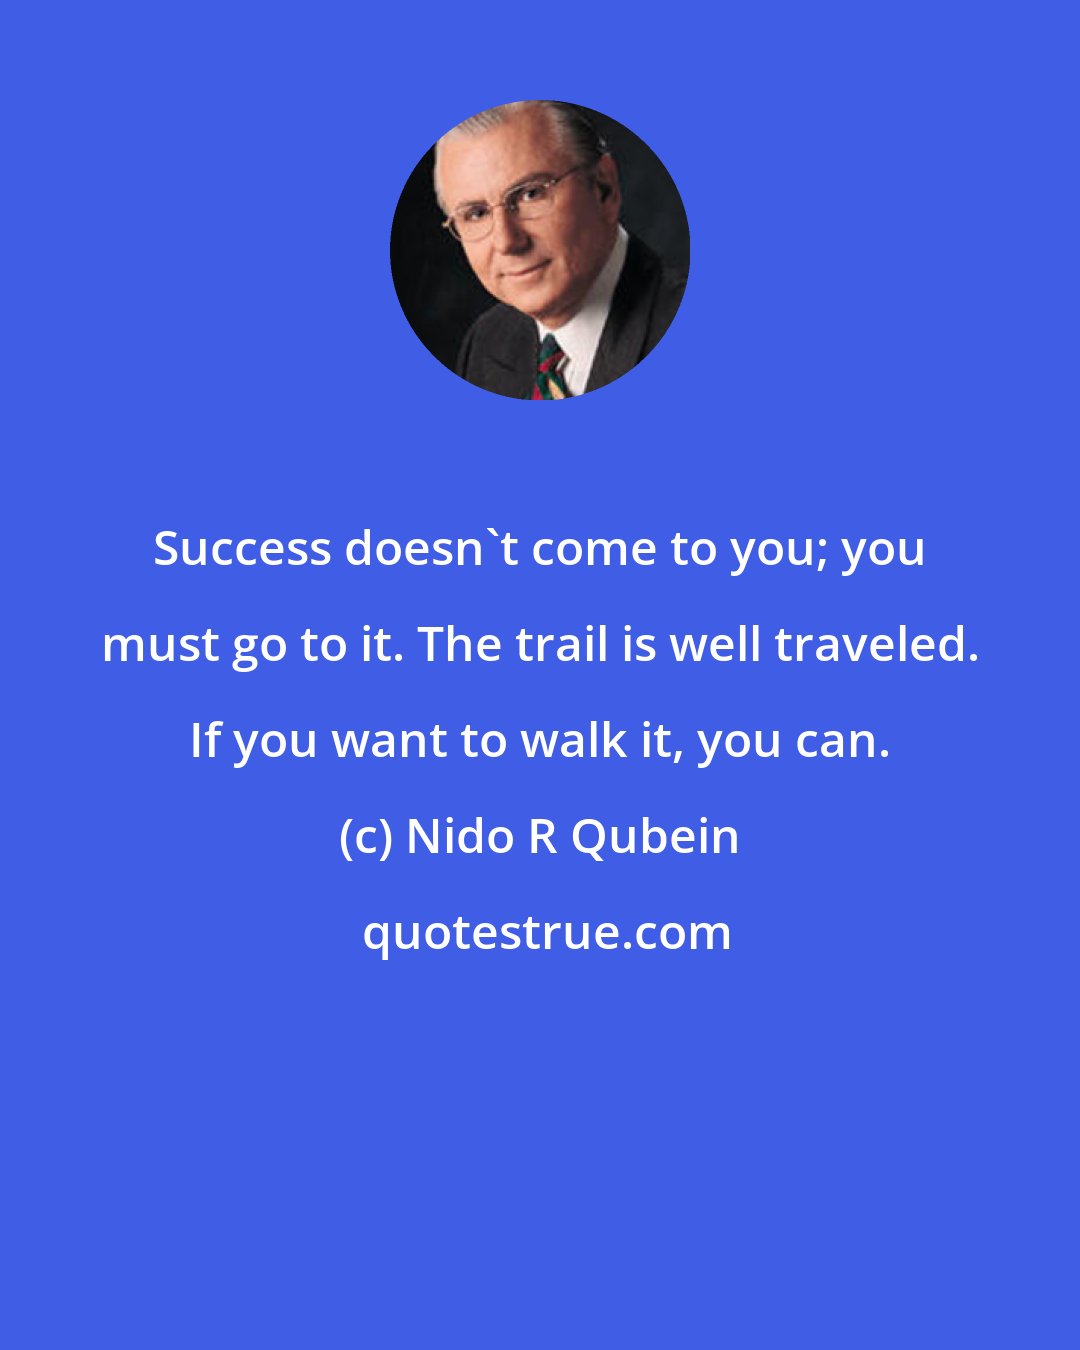 Nido R Qubein: Success doesn't come to you; you must go to it. The trail is well traveled. If you want to walk it, you can.